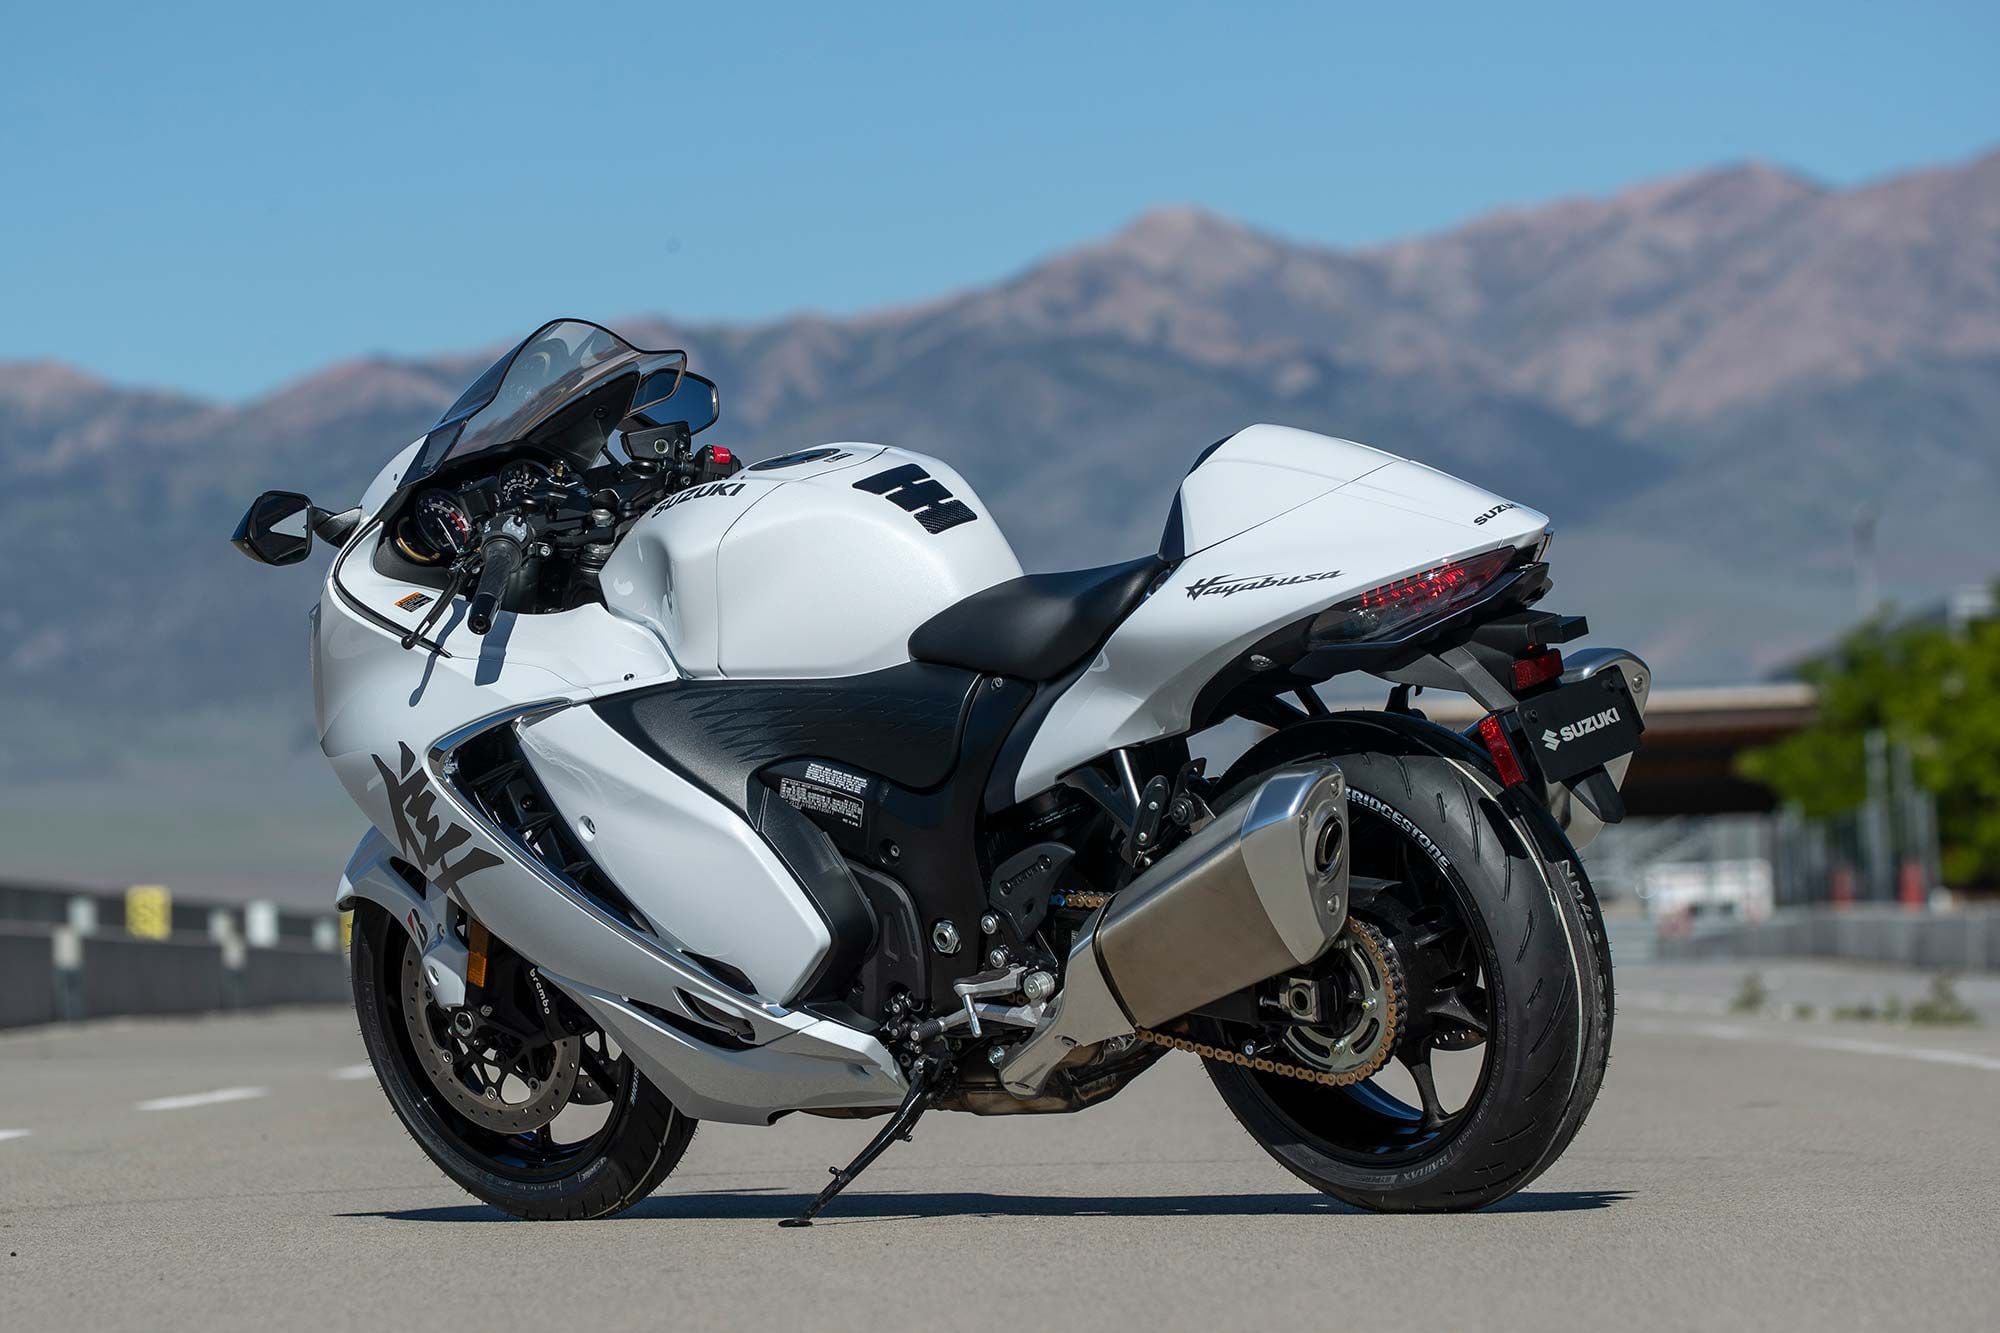 Long, fast, and low—Suzuki’s 2022 Hayabusa sportbike elevates its level of versatility both on the road and the racetrack.